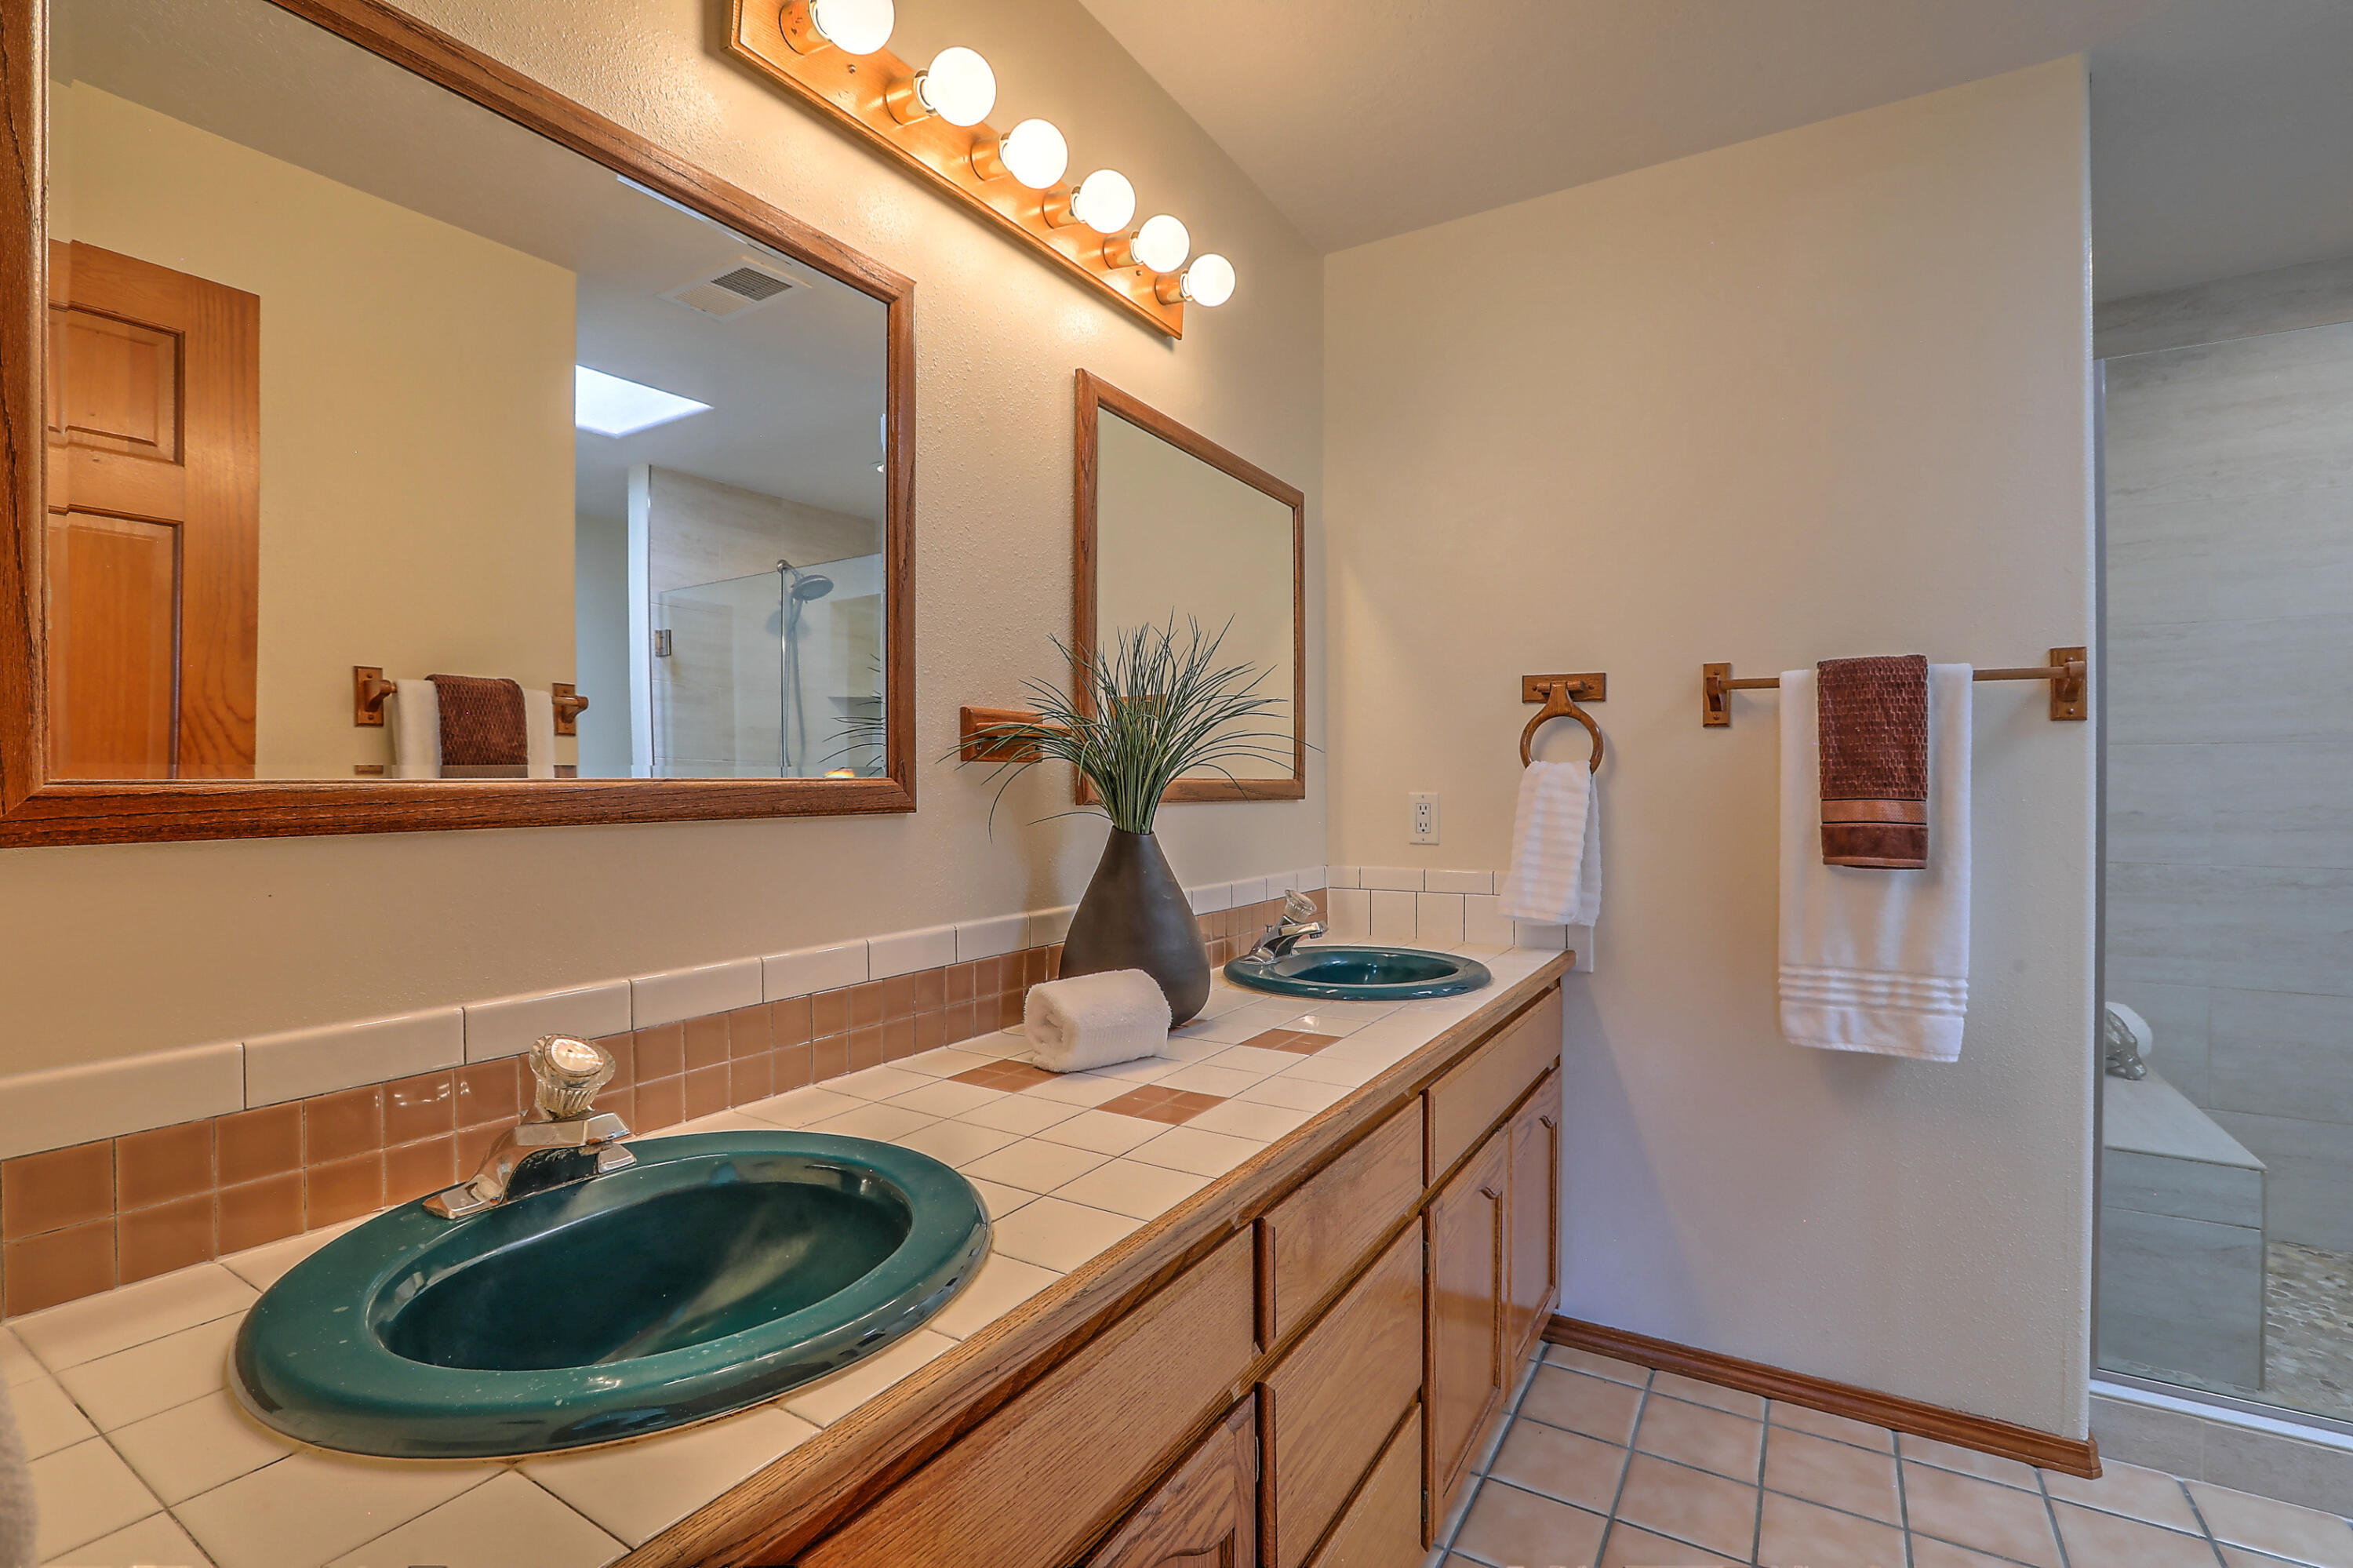 88 Lena Court, Corrales, New Mexico 87048, 3 Bedrooms Bedrooms, ,2 BathroomsBathrooms,Residential,For Sale,88 Lena Court,1058595